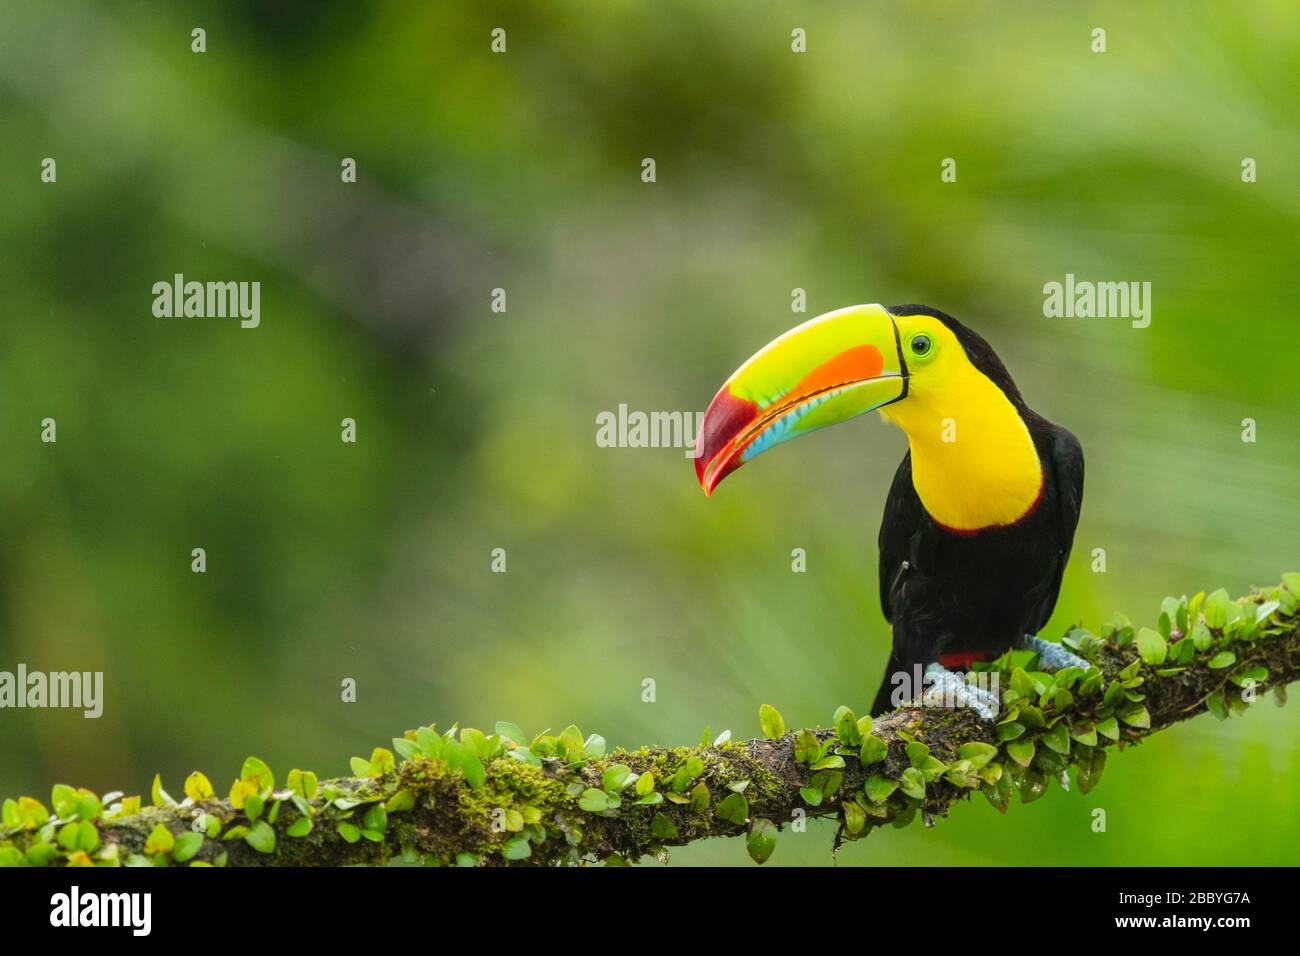 closeup portrait of a keel-billed toucan in Costa Rica Stock Photo